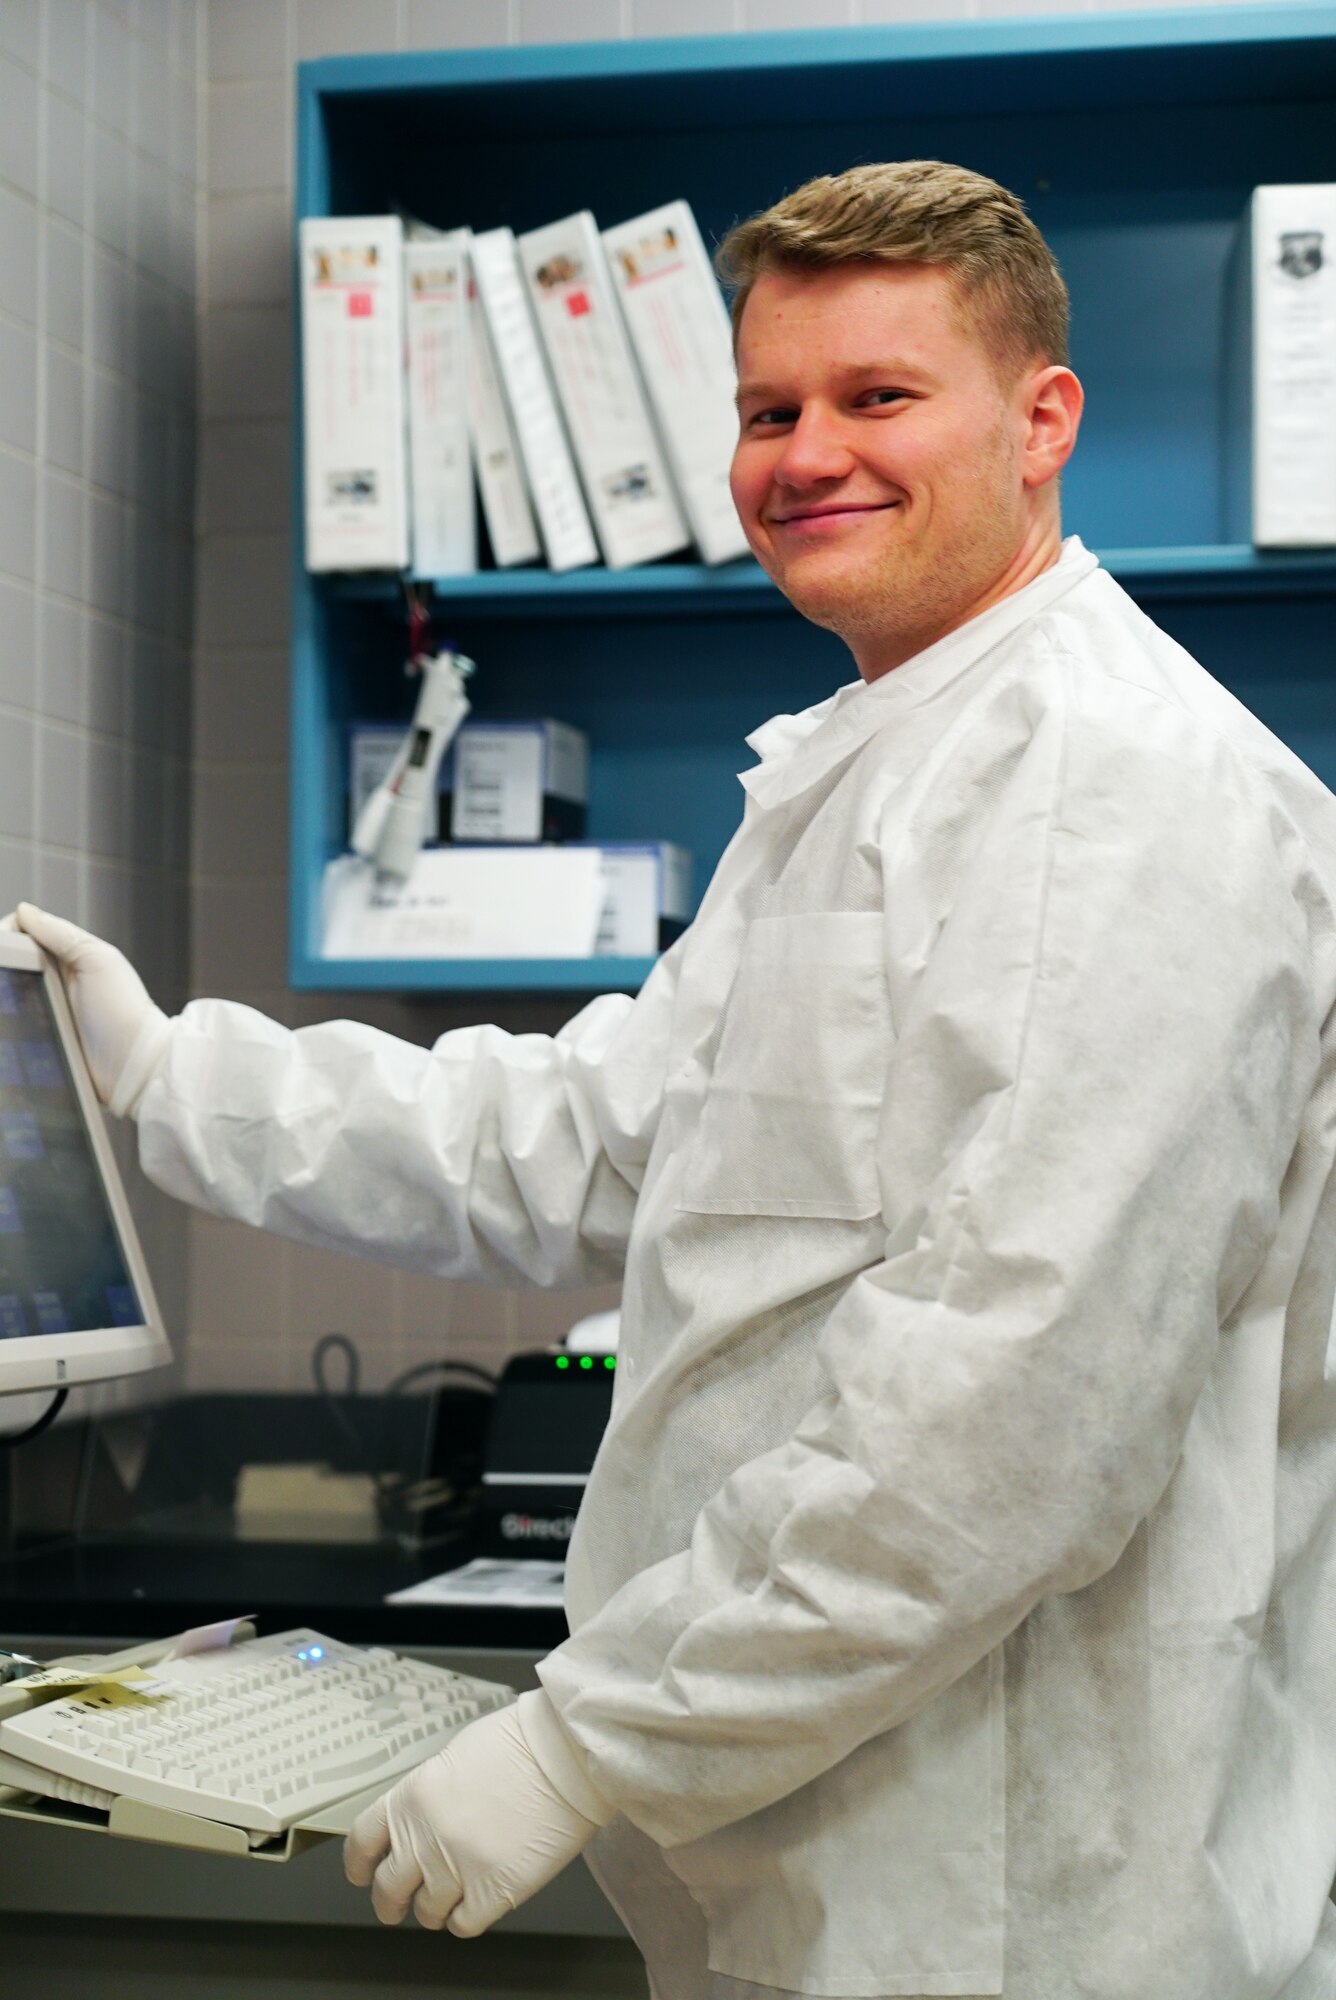 Senior Airman Marshall Gladden, a 319th Healthcare Operations Squadron laboratory technician, is shown in his workplace at Grand Forks Air Force Base, N.D., Jan. 21, 2021. Medical laboratory technicians provide crucial testing and results to help doctors properly diagnose patients.